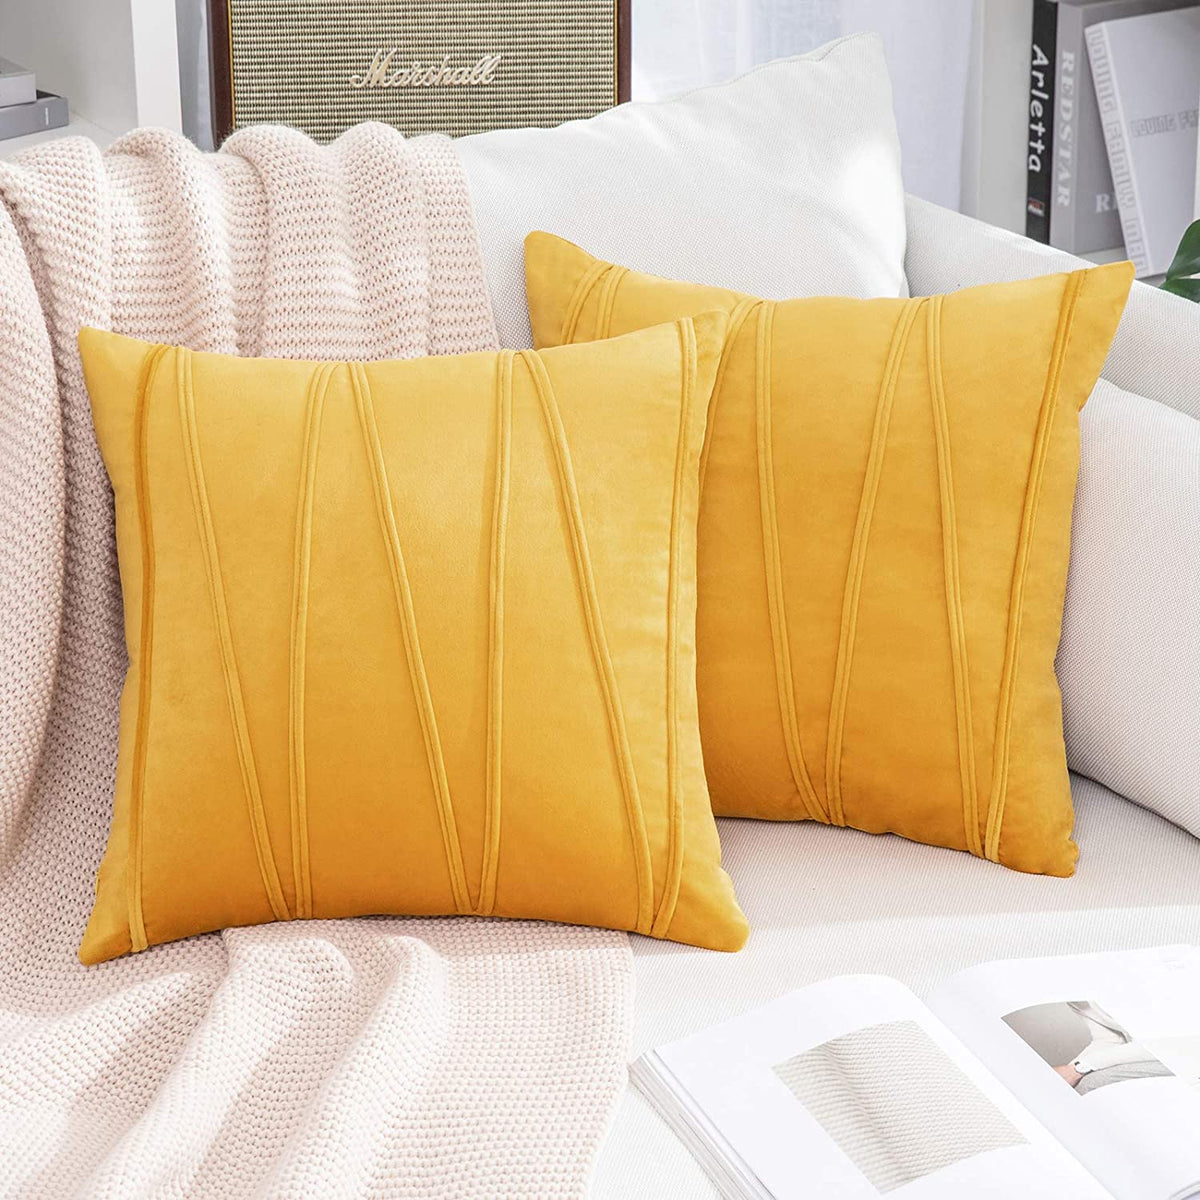 Miulee Velvet Pillow Covers Decorative Soft Solid Cushion Case 2 Pack